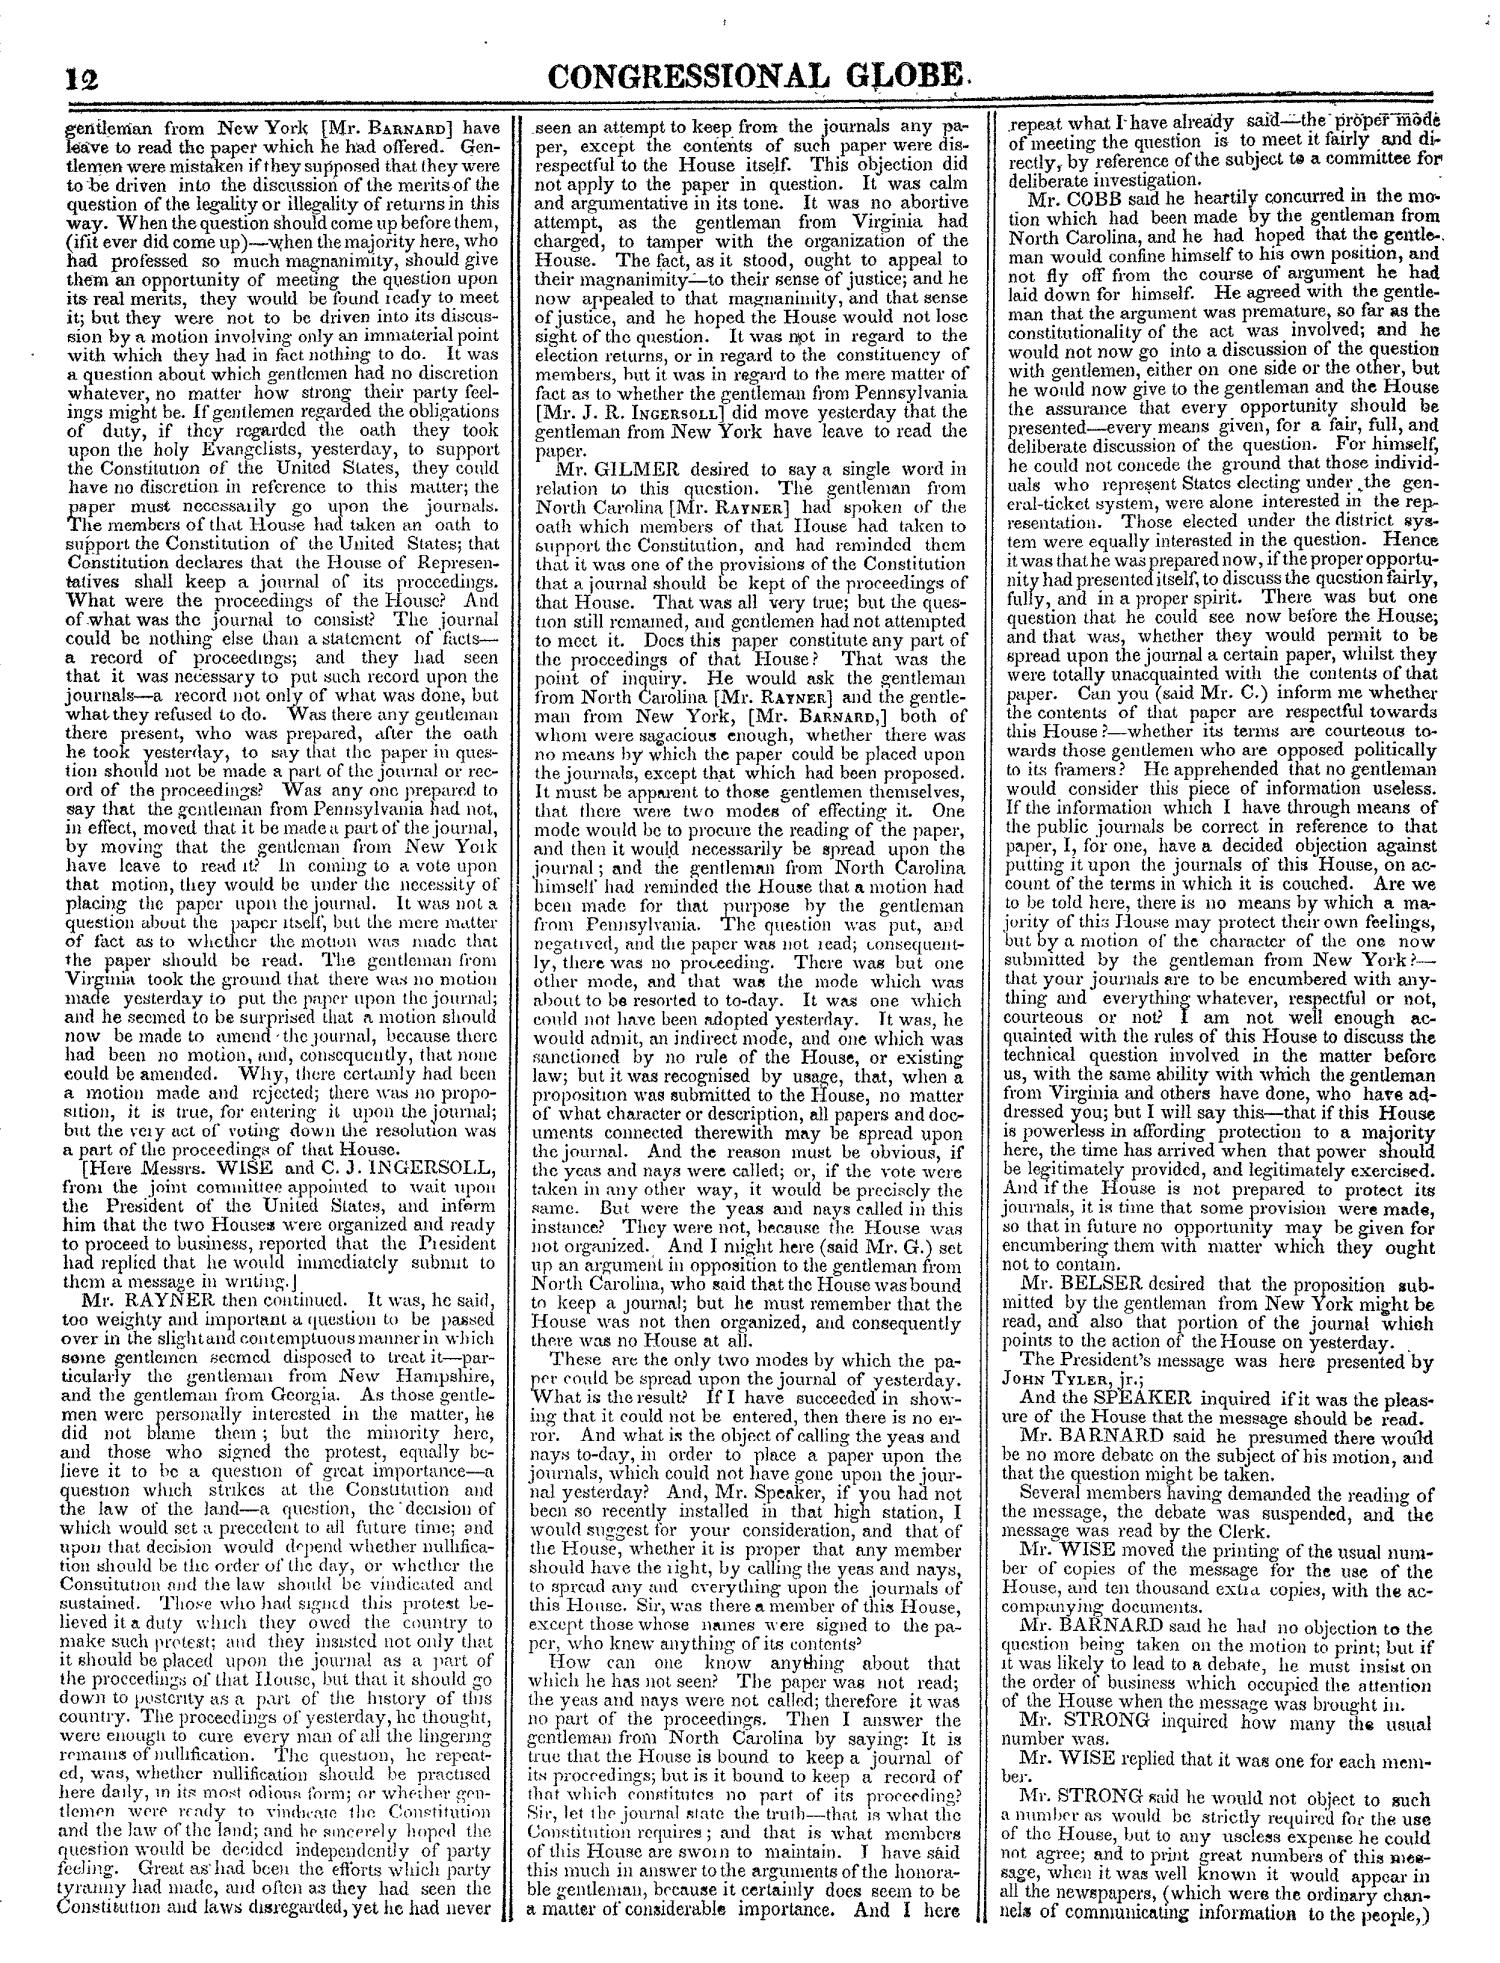 The Congressional Globe, Volume 13, Part 1: Twenty-Eighth Congress, First Session
                                                
                                                    12
                                                